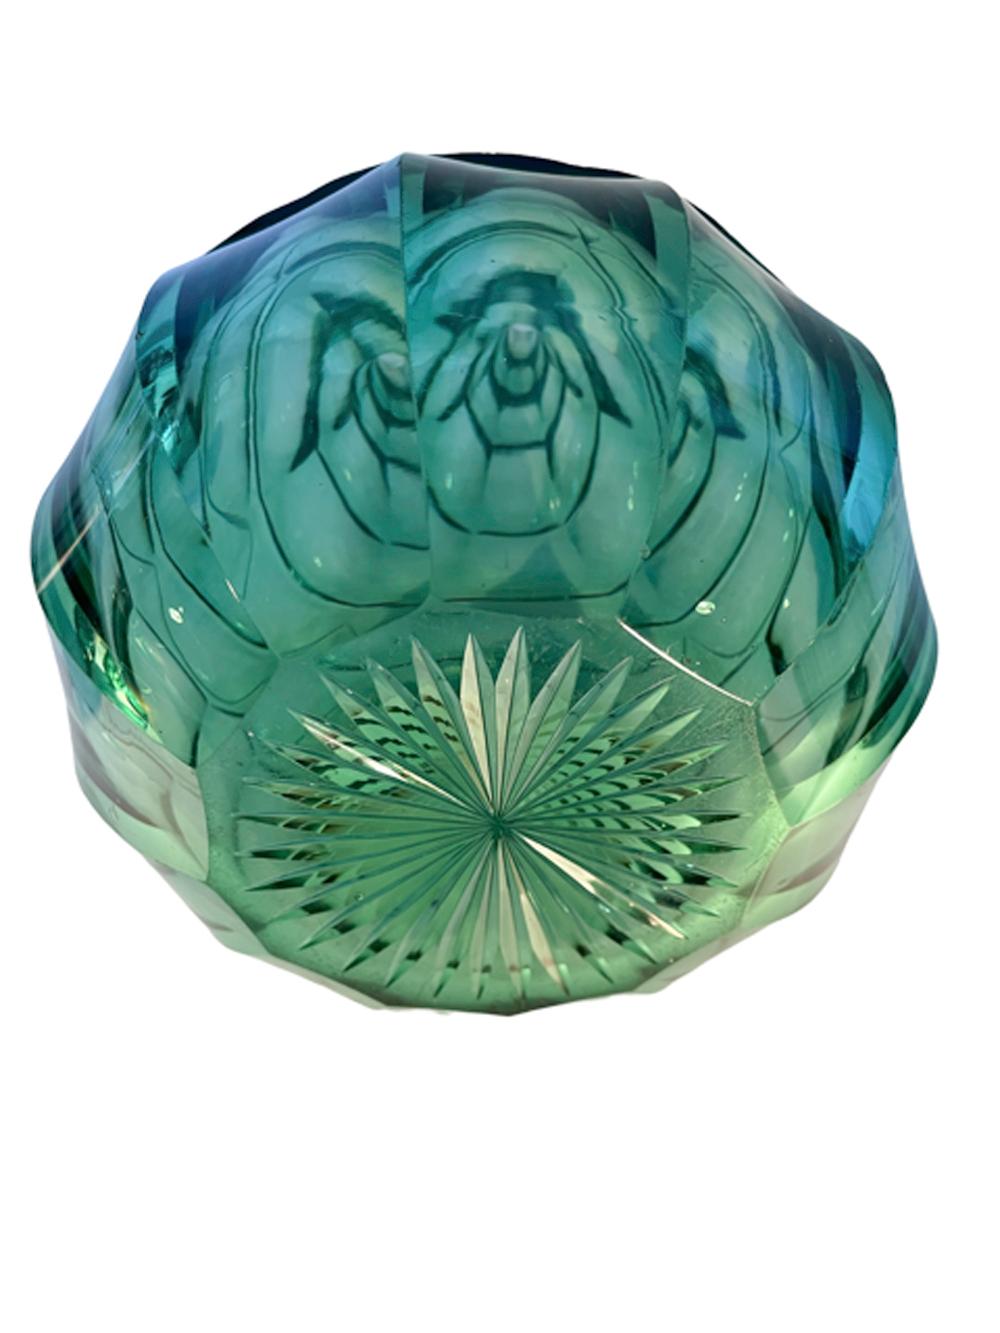 Pair of elaborately cut emerald green glass Anglo-Irish decanters of bulbous form with tiered bands of lobe-cut panels from the top of the neck to the widest point then continuing with panels to the star cut bottom, each with its original ball